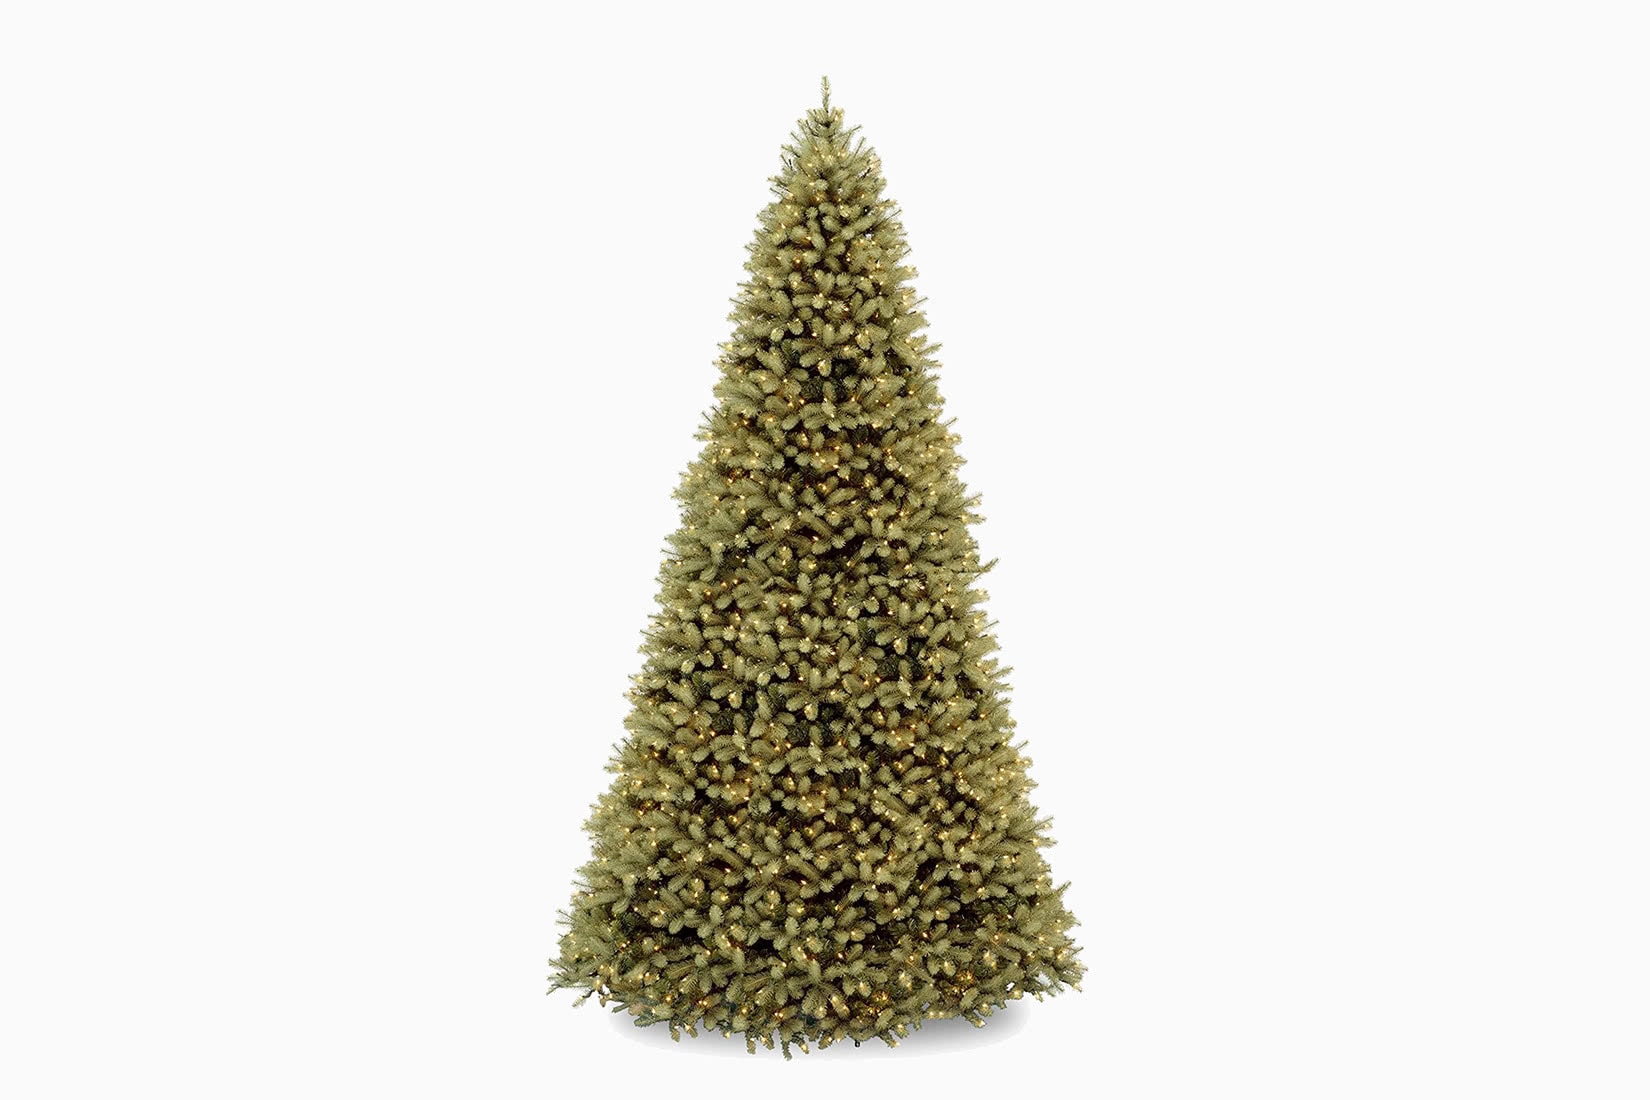 What does Downswept mean in Christmas trees?